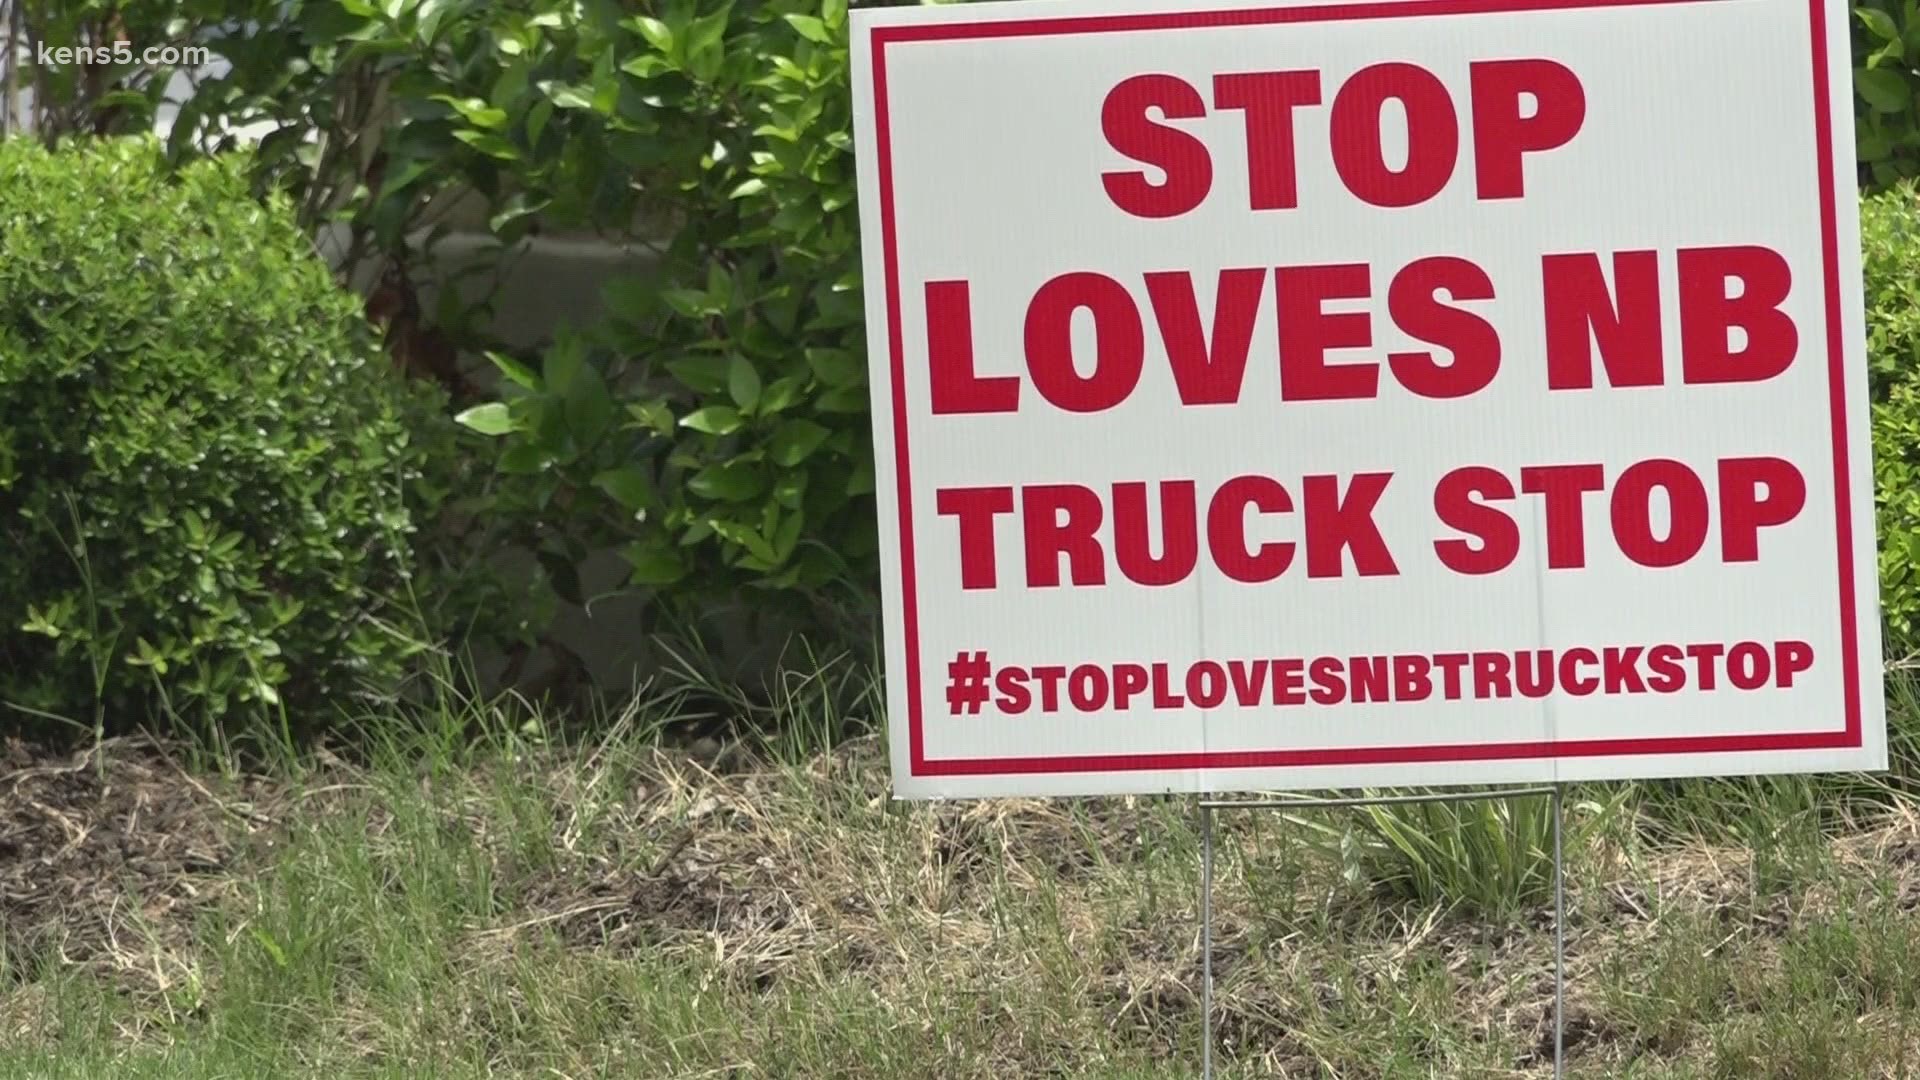 Development plans show the Love's Truck Stop would be constructed within 200 feet from some homes.